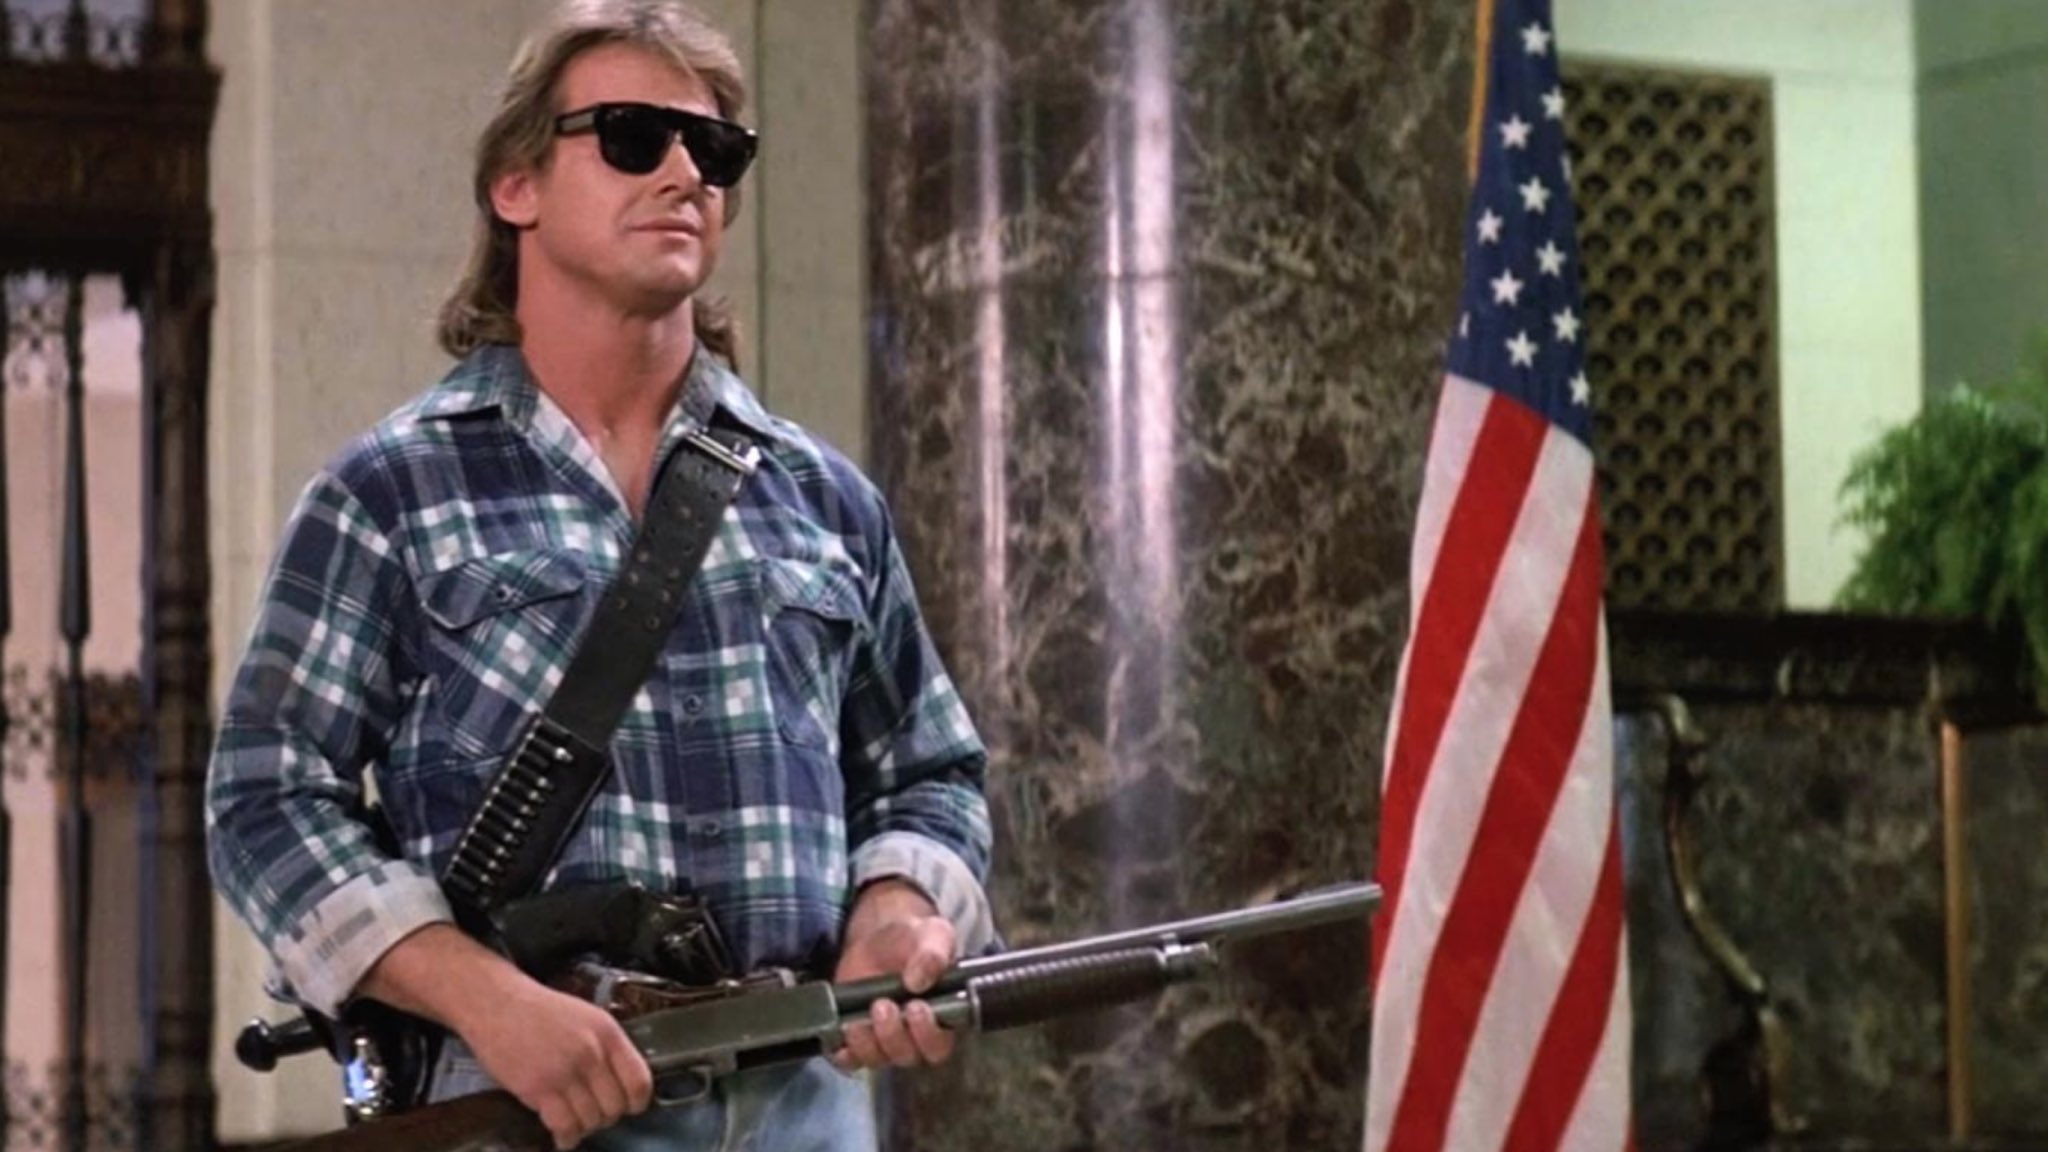 Happy birthday to the late great Roddy Piper ...two great roles here as well as a wrestling legend 